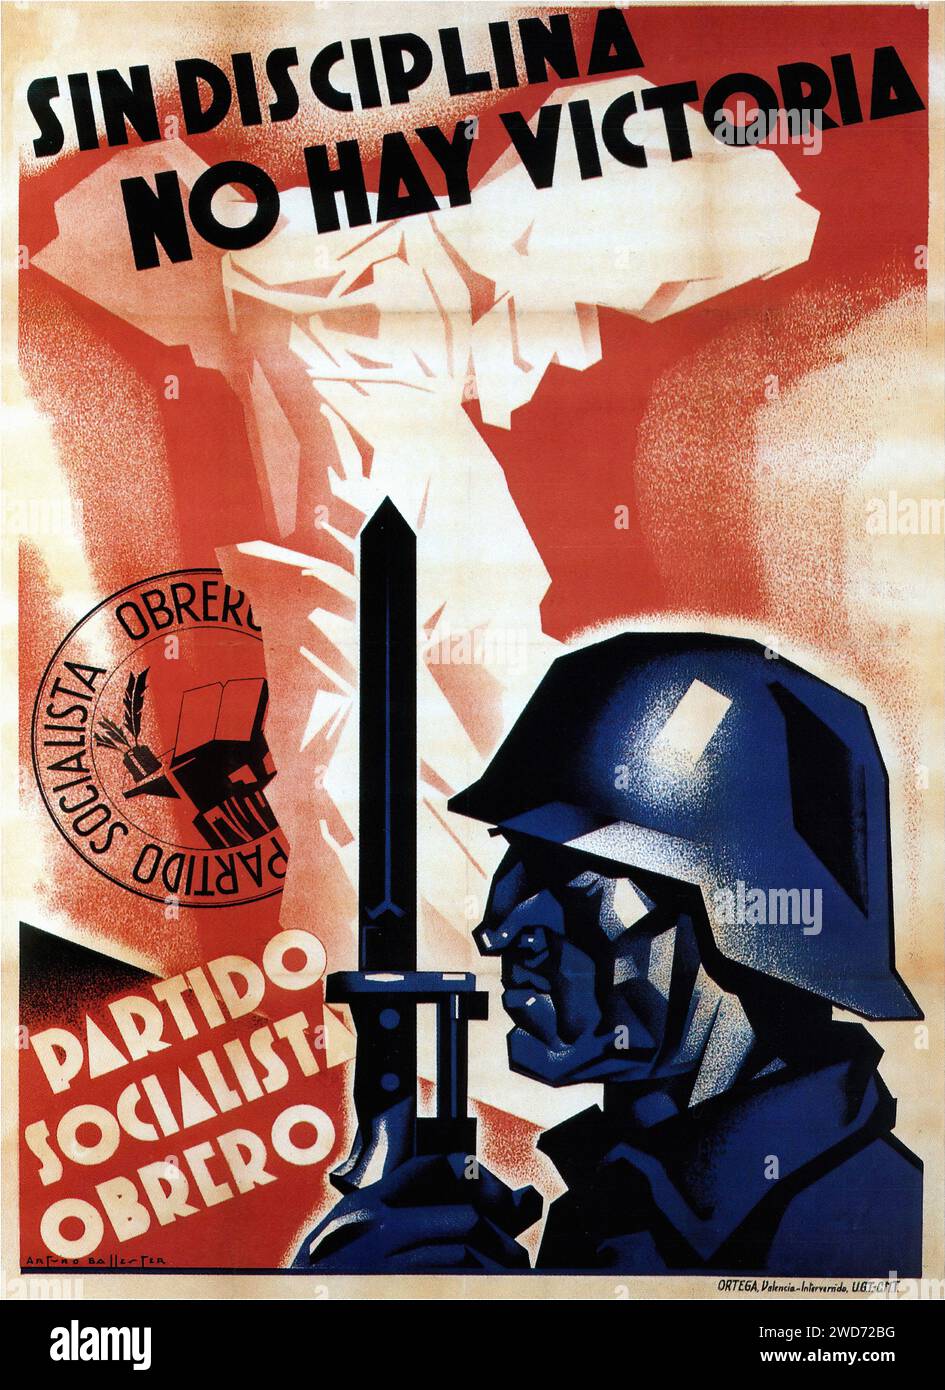 'Sin disciplina no hay victoria' 'No Victory Without Discipline' A soldier's silhouette in profile, with a stylized helmet and a clenched fist, set against an abstract red backdrop, conveys the message of discipline leading to victory.  - Spanish Civil War (Guerra Civil Española) Propaganda Poster Stock Photo